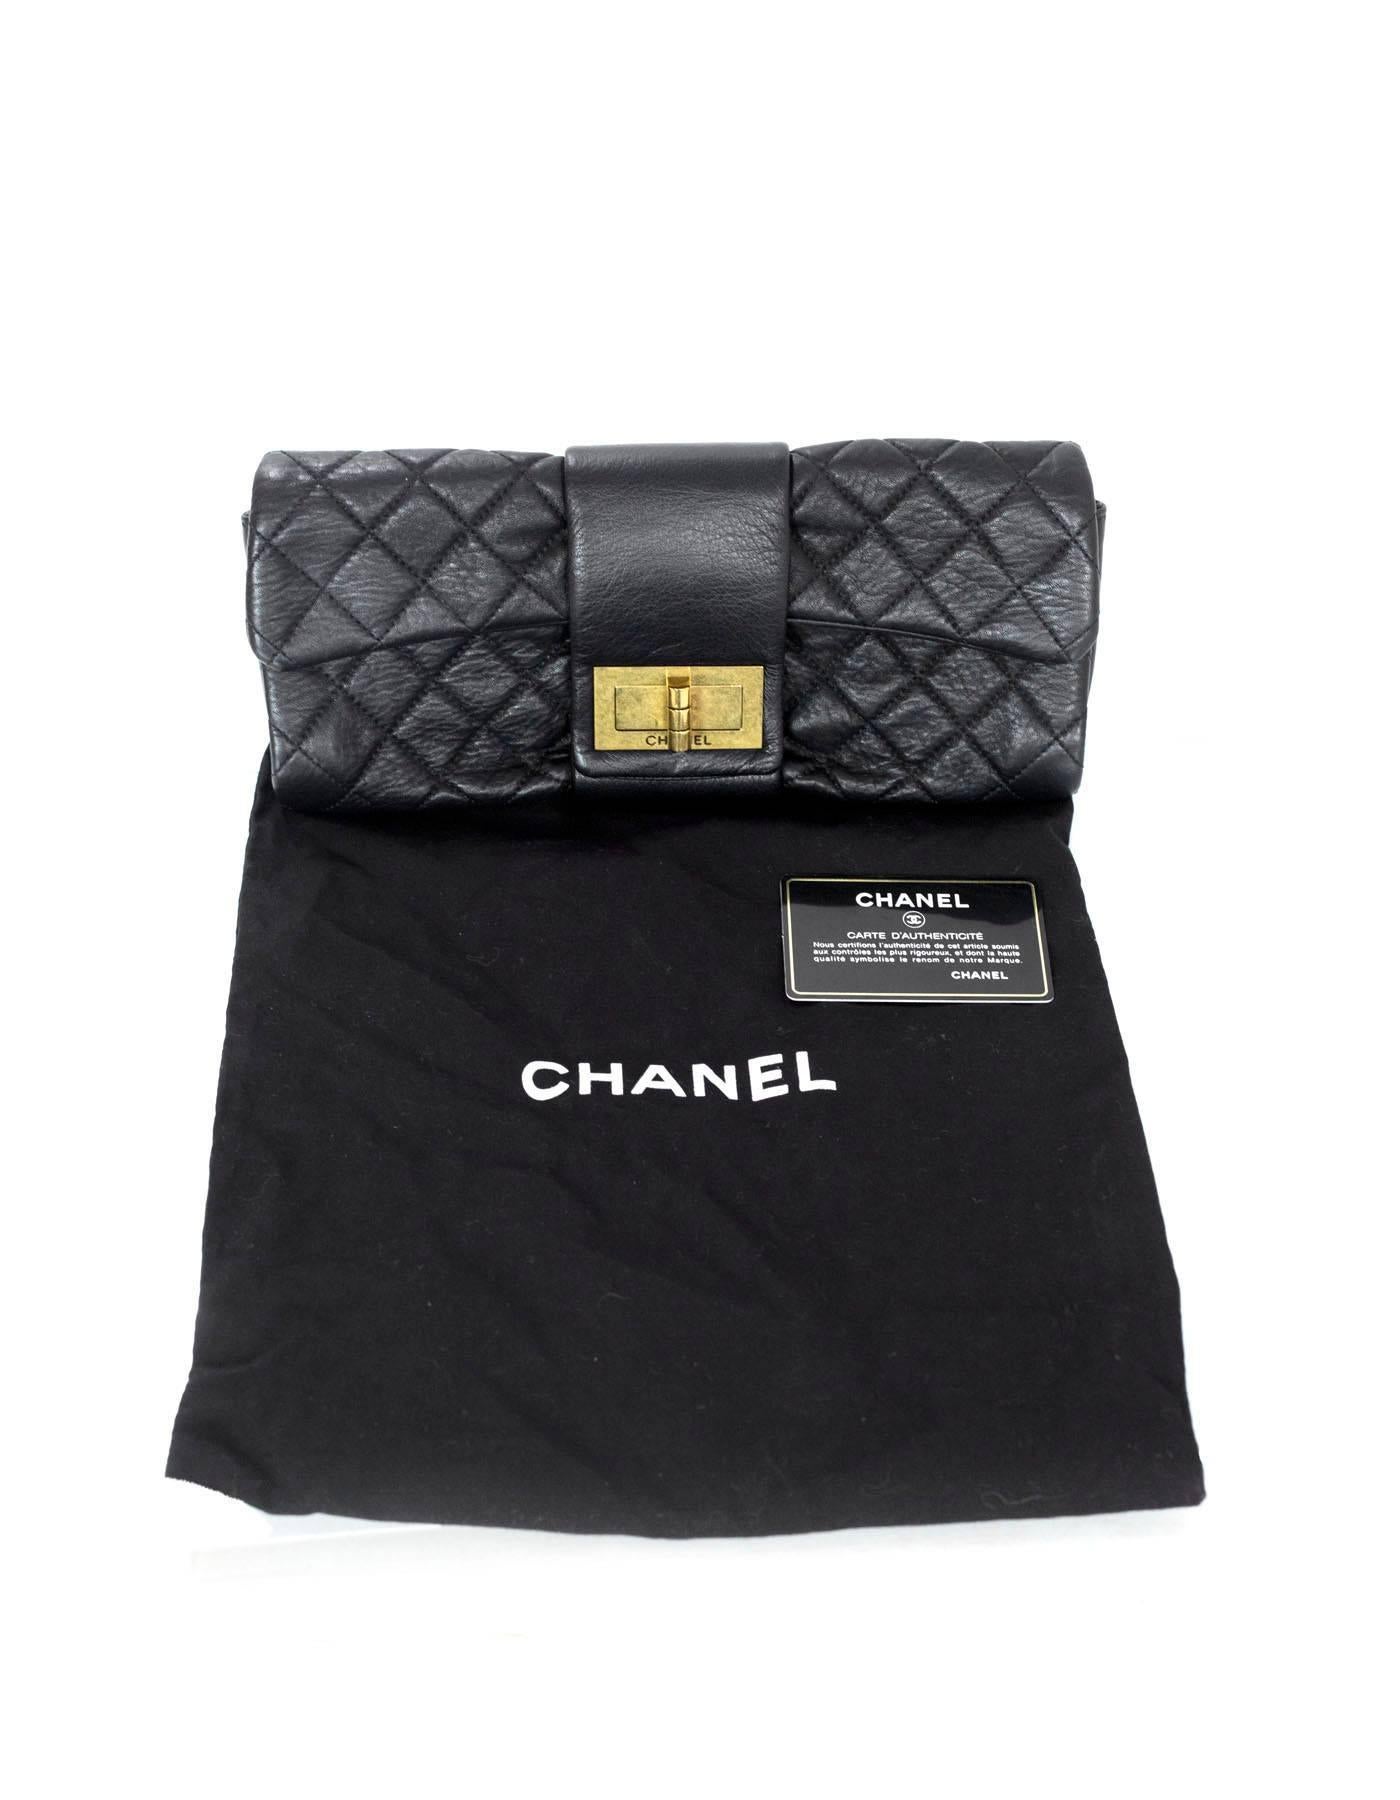 Chanel Black Quilted Leather 2.55 Reissue Clutch Bag 3